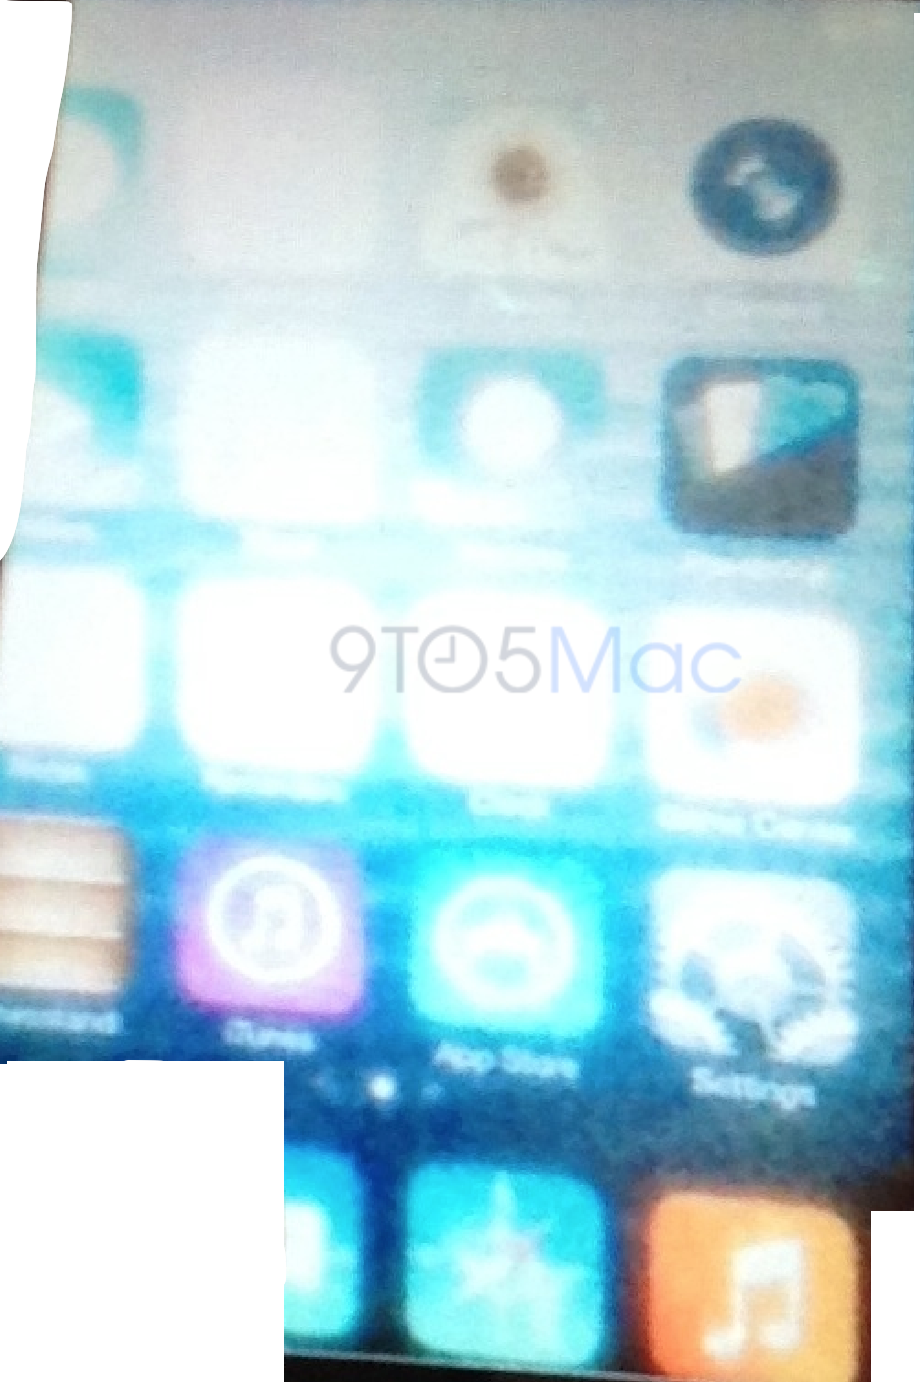 Leaked Spy Shot Shows an Early Build of iOS 7? [Photo]